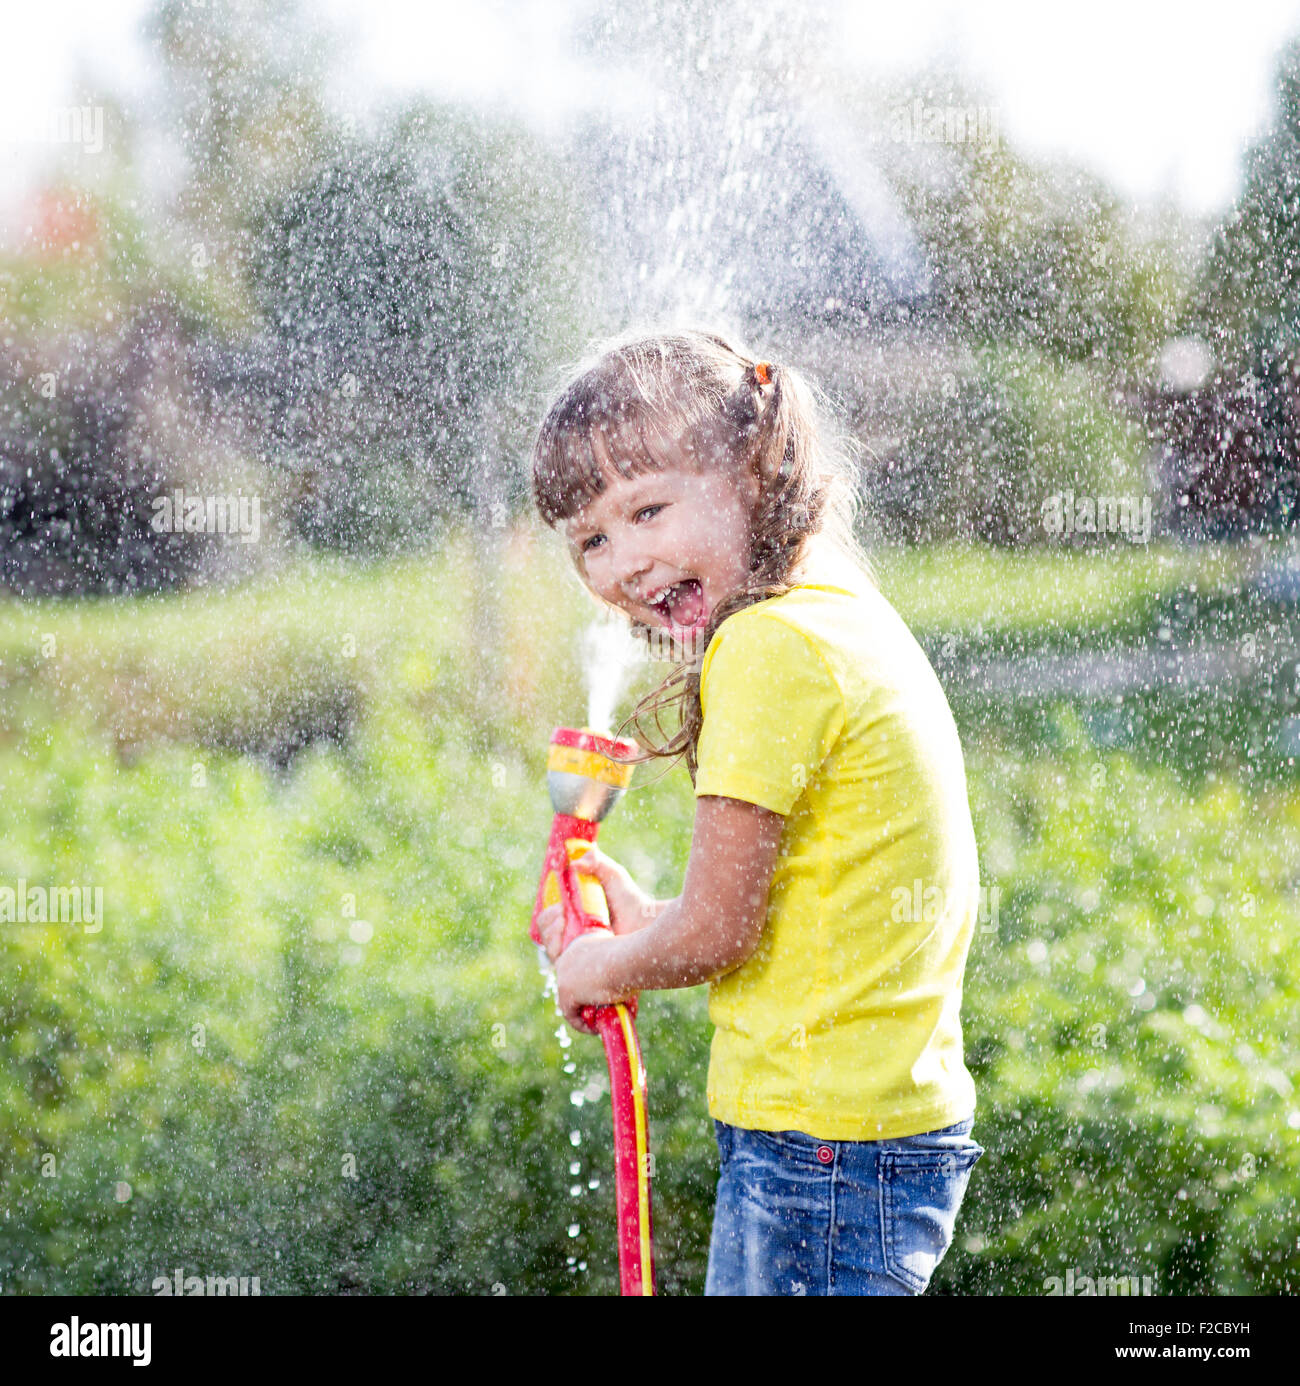 Cheerful kid watering plants from hose spray in garden at backyard of house at sunny summertime Stock Photo